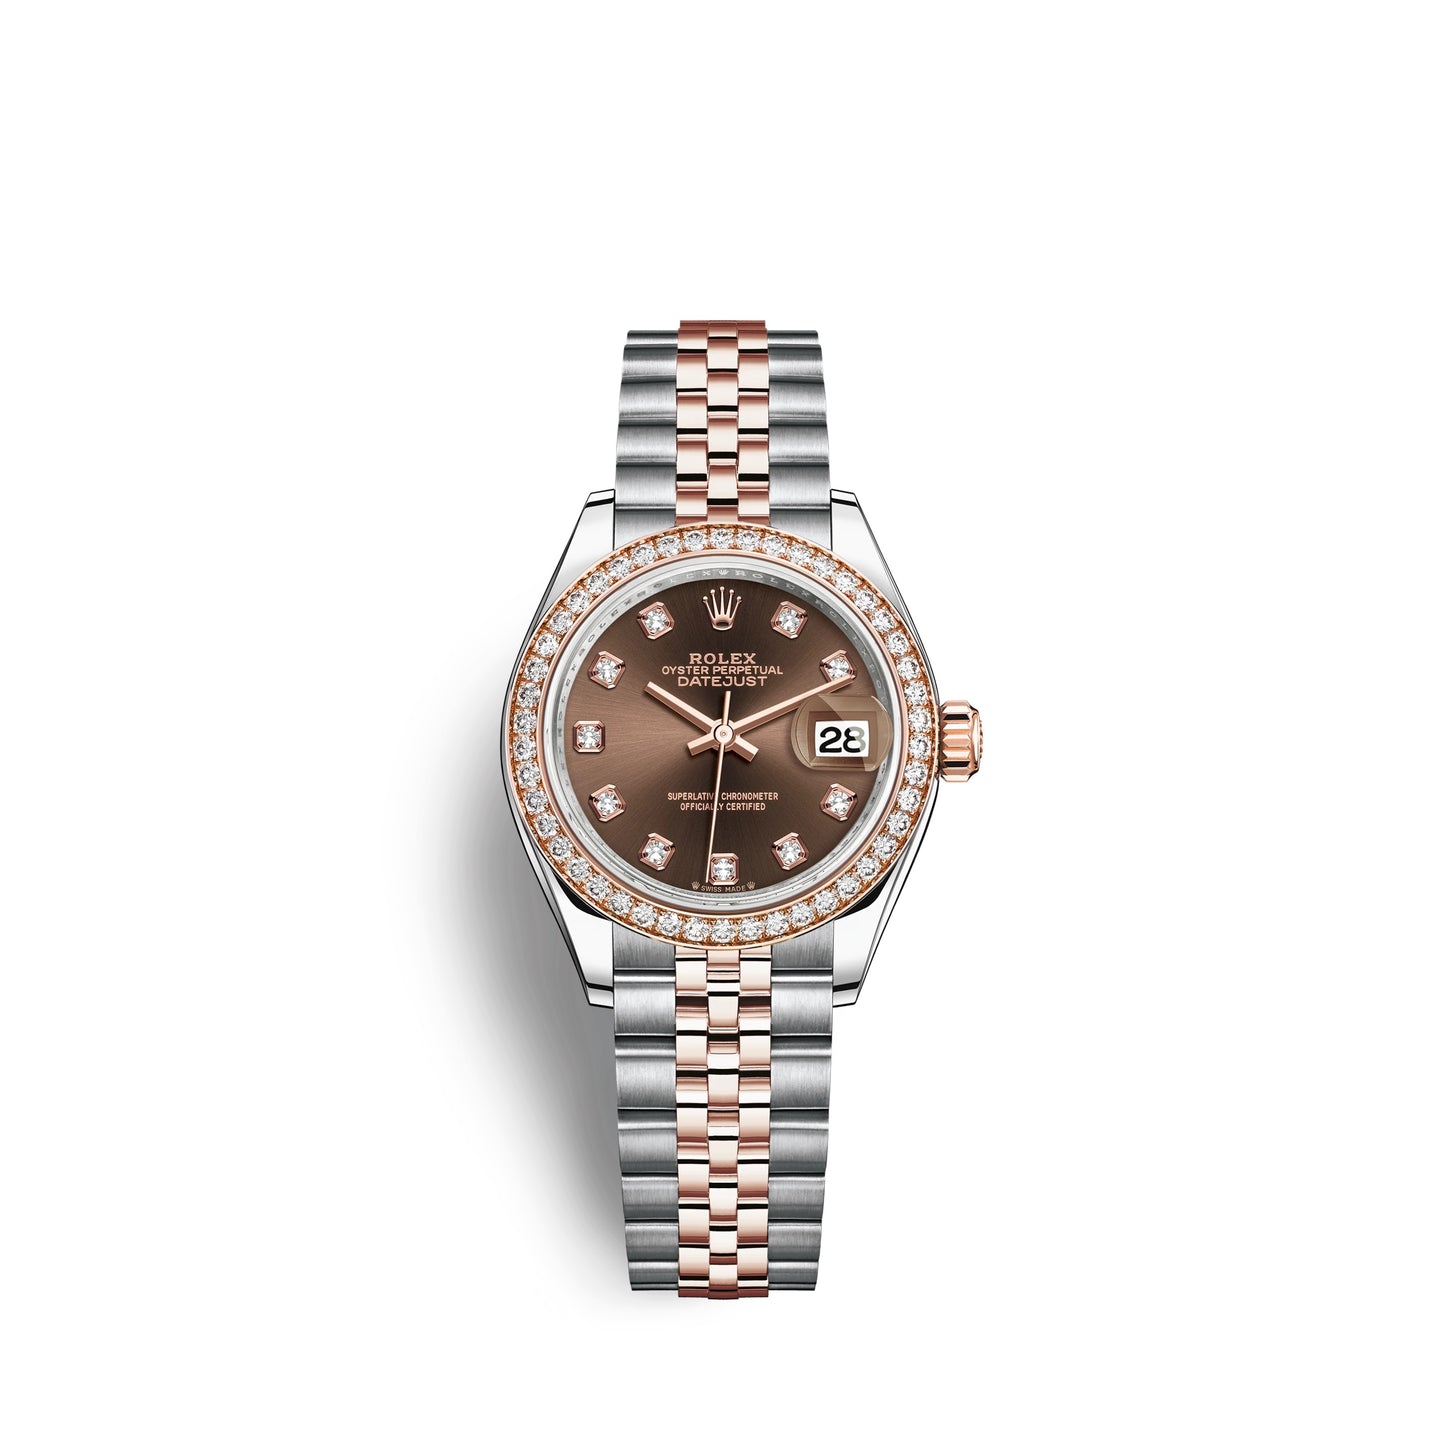 Rolex Lady-Datejust 28, Oystersteel and 18k Everose Gold, Ref# 279381RBR-0011